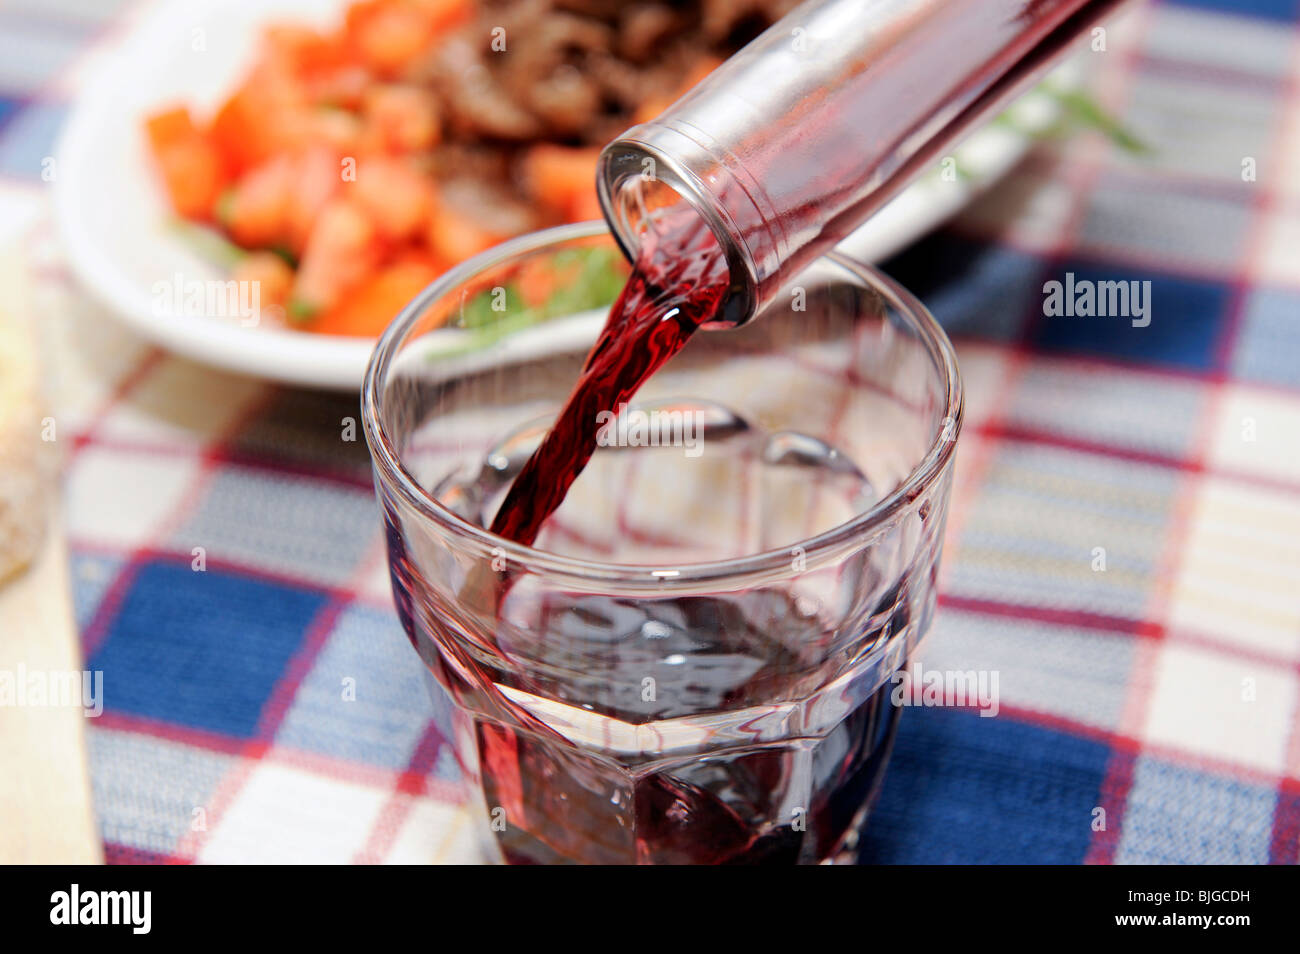 Home made italian cuisine, pouring red wine in a glass Stock Photo